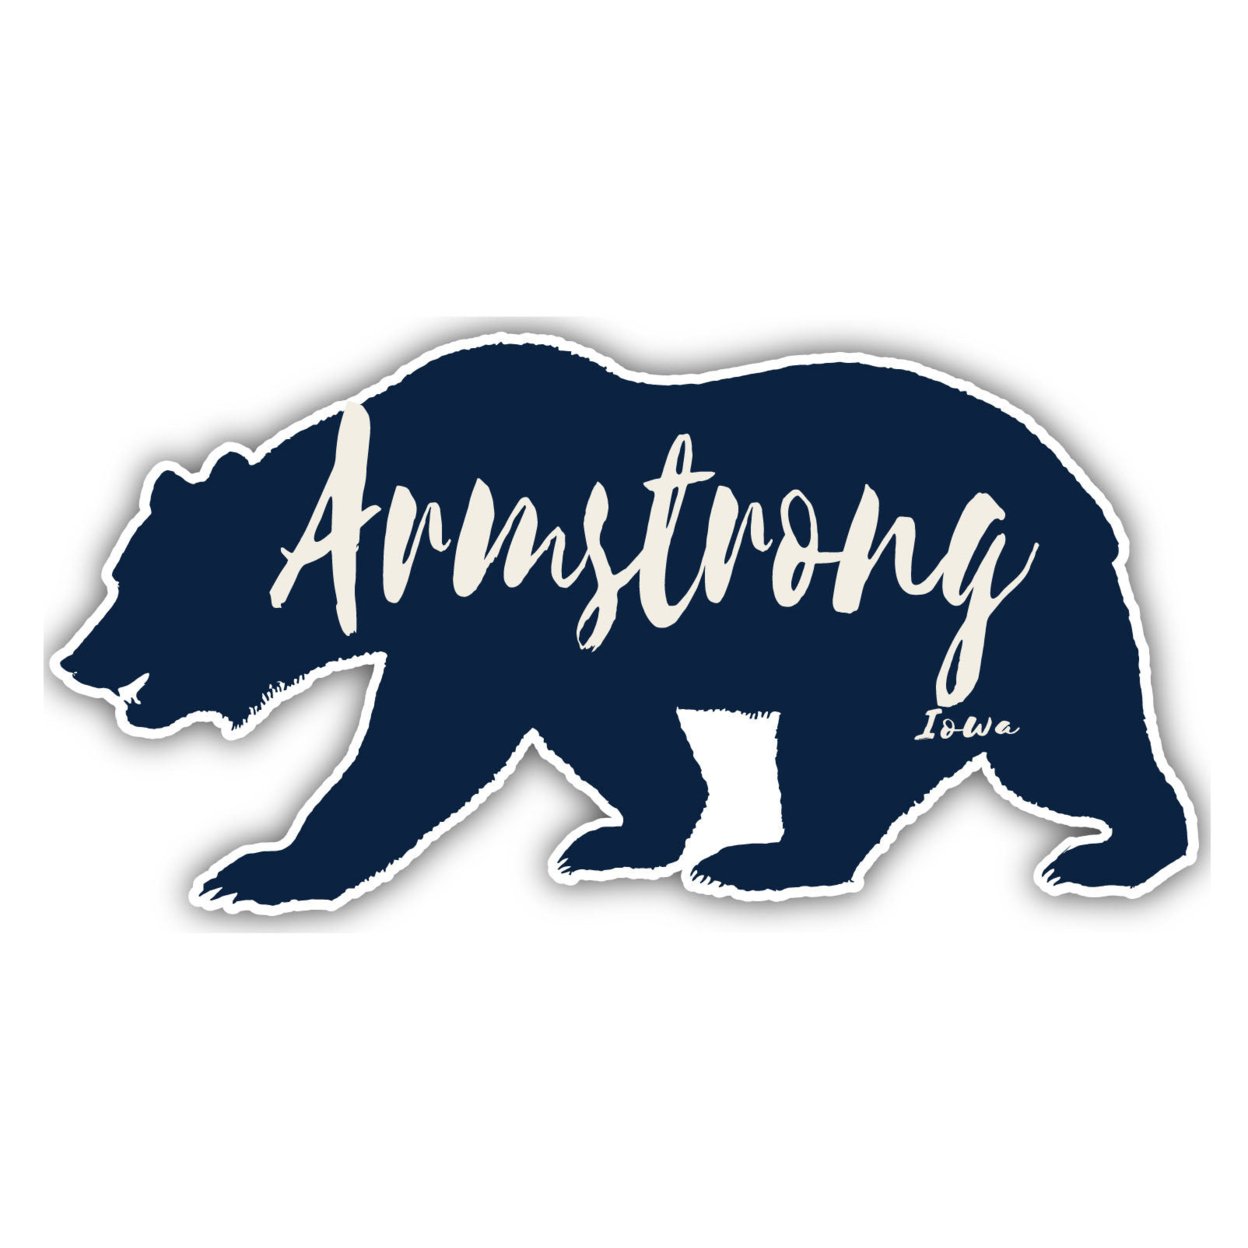 Armstrong Iowa Souvenir Decorative Stickers (Choose Theme And Size) - 4-Pack, 6-Inch, Bear